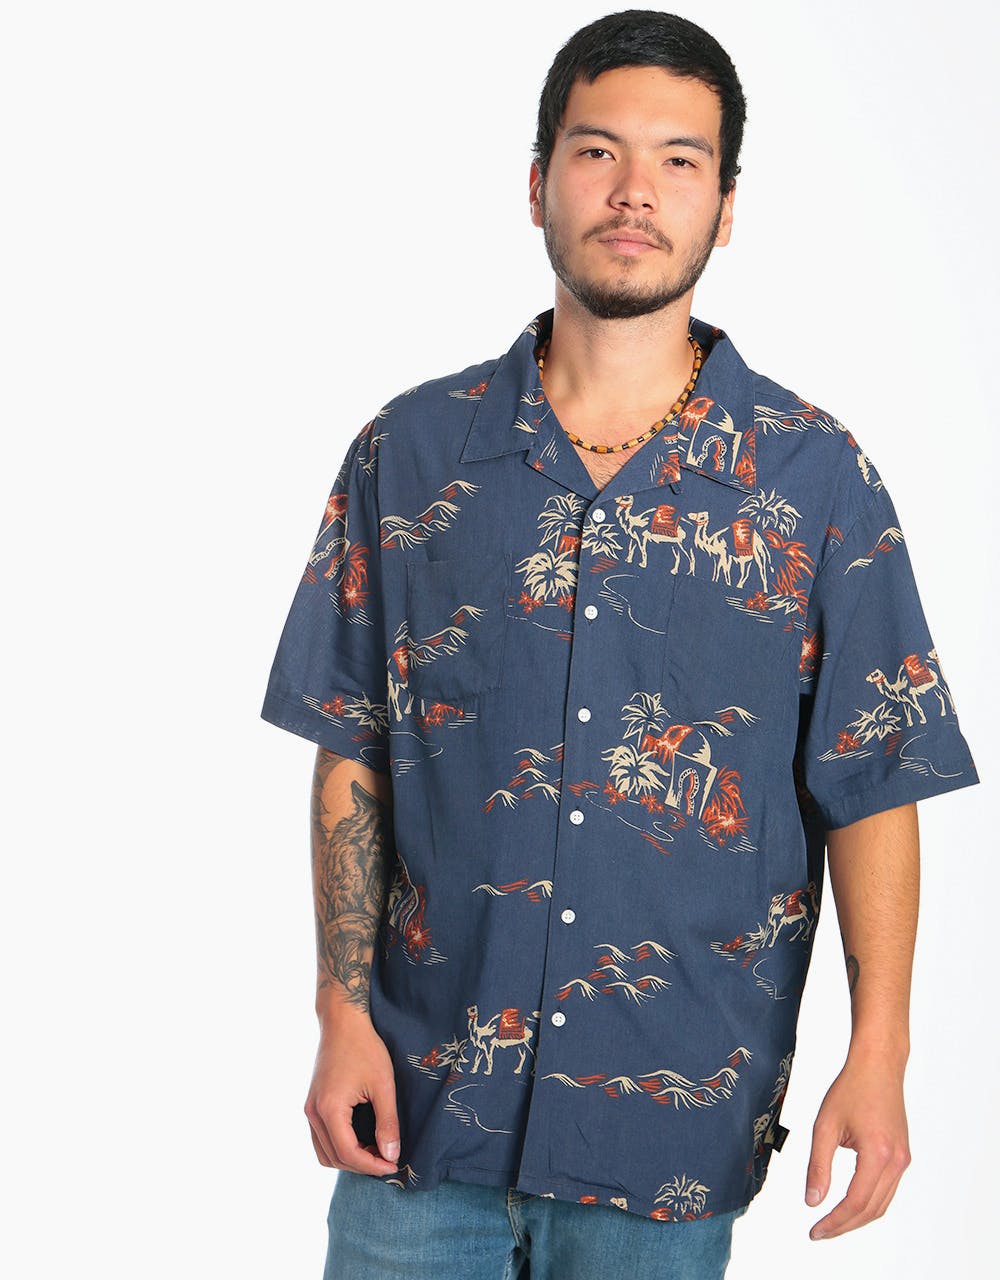 Brixton Cruze S/S Woven Shirt - Washed Navy/Ginger